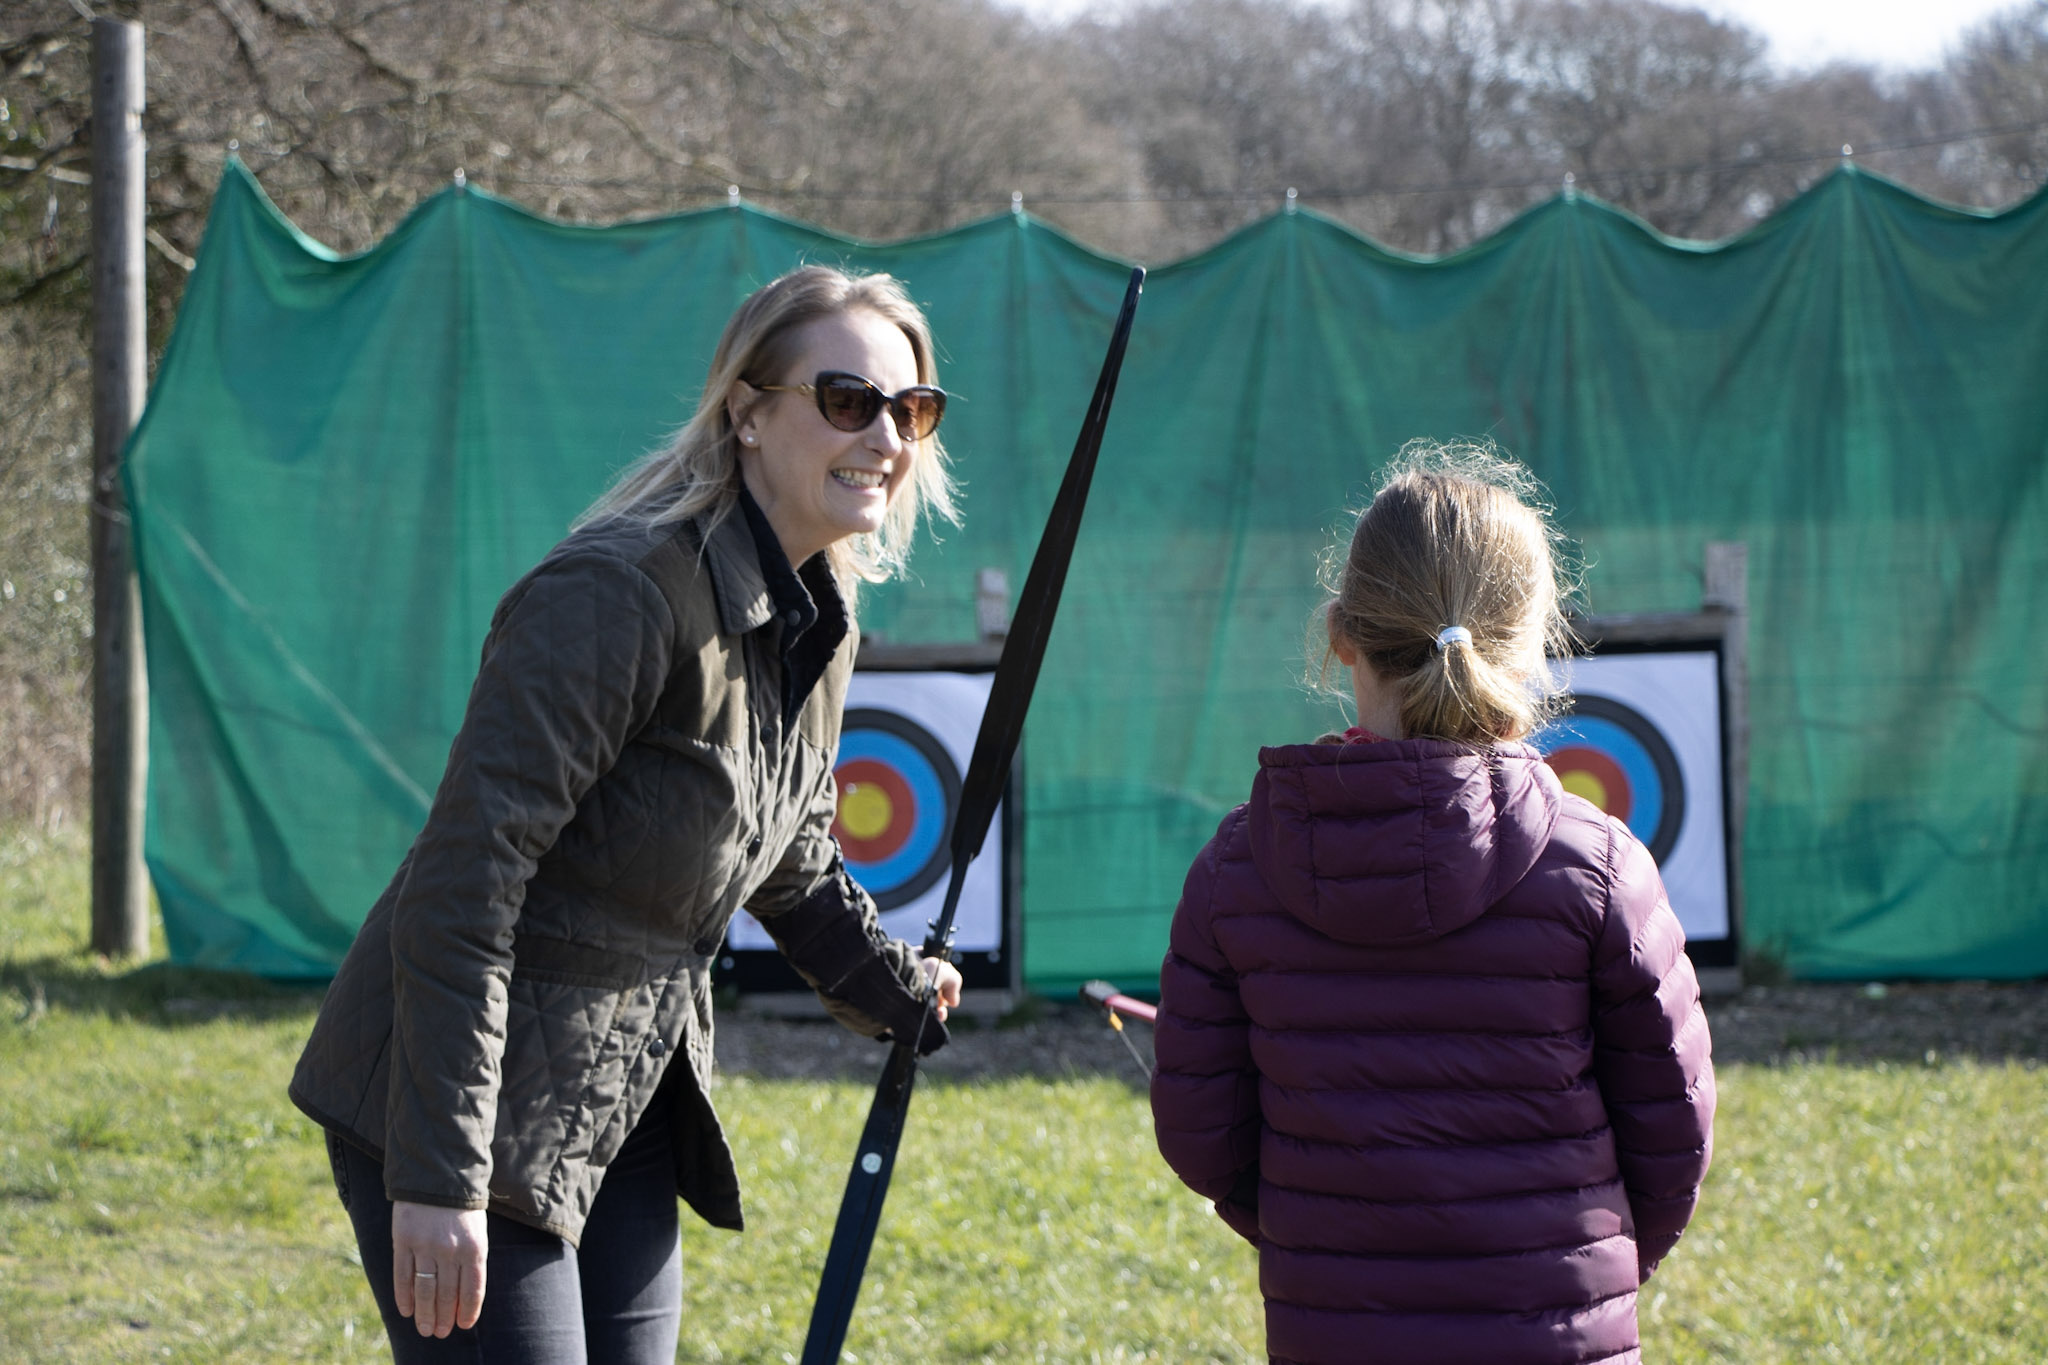 A mother and daughter taking part in archery